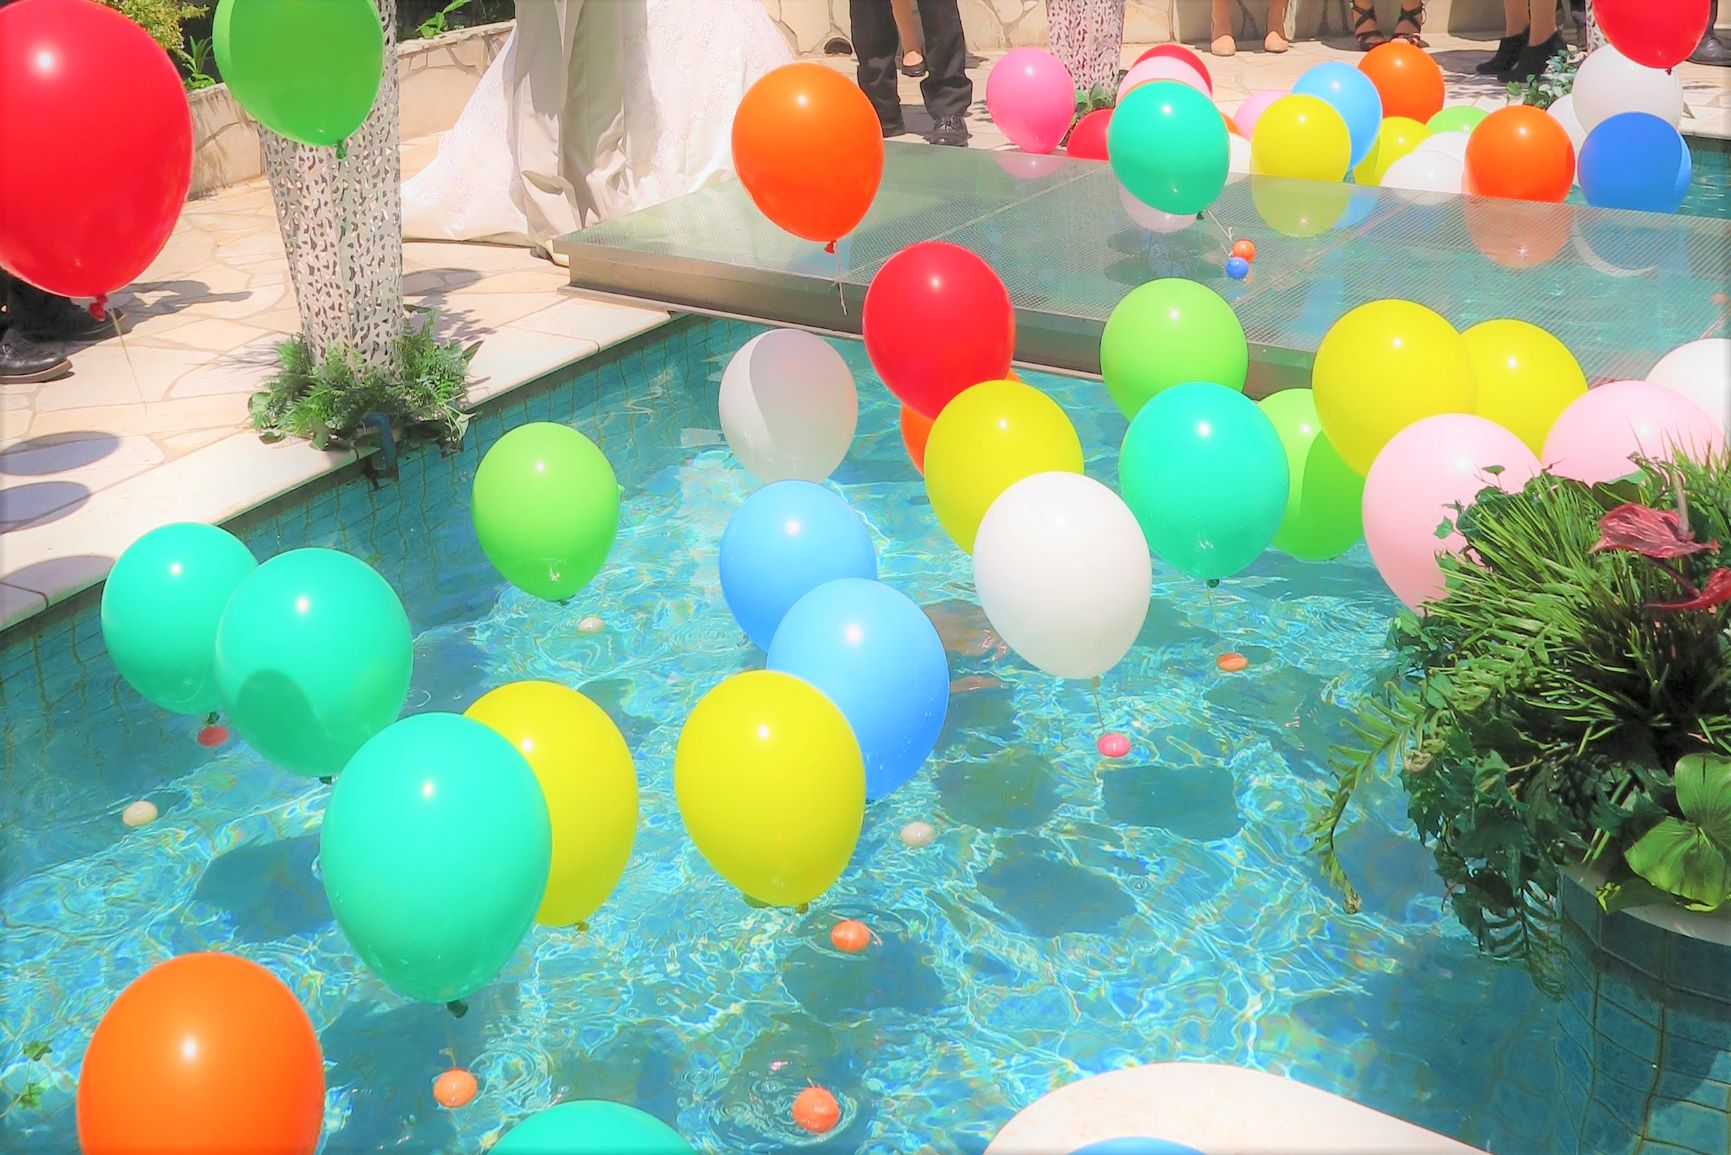 Wedding balloons floating on the water